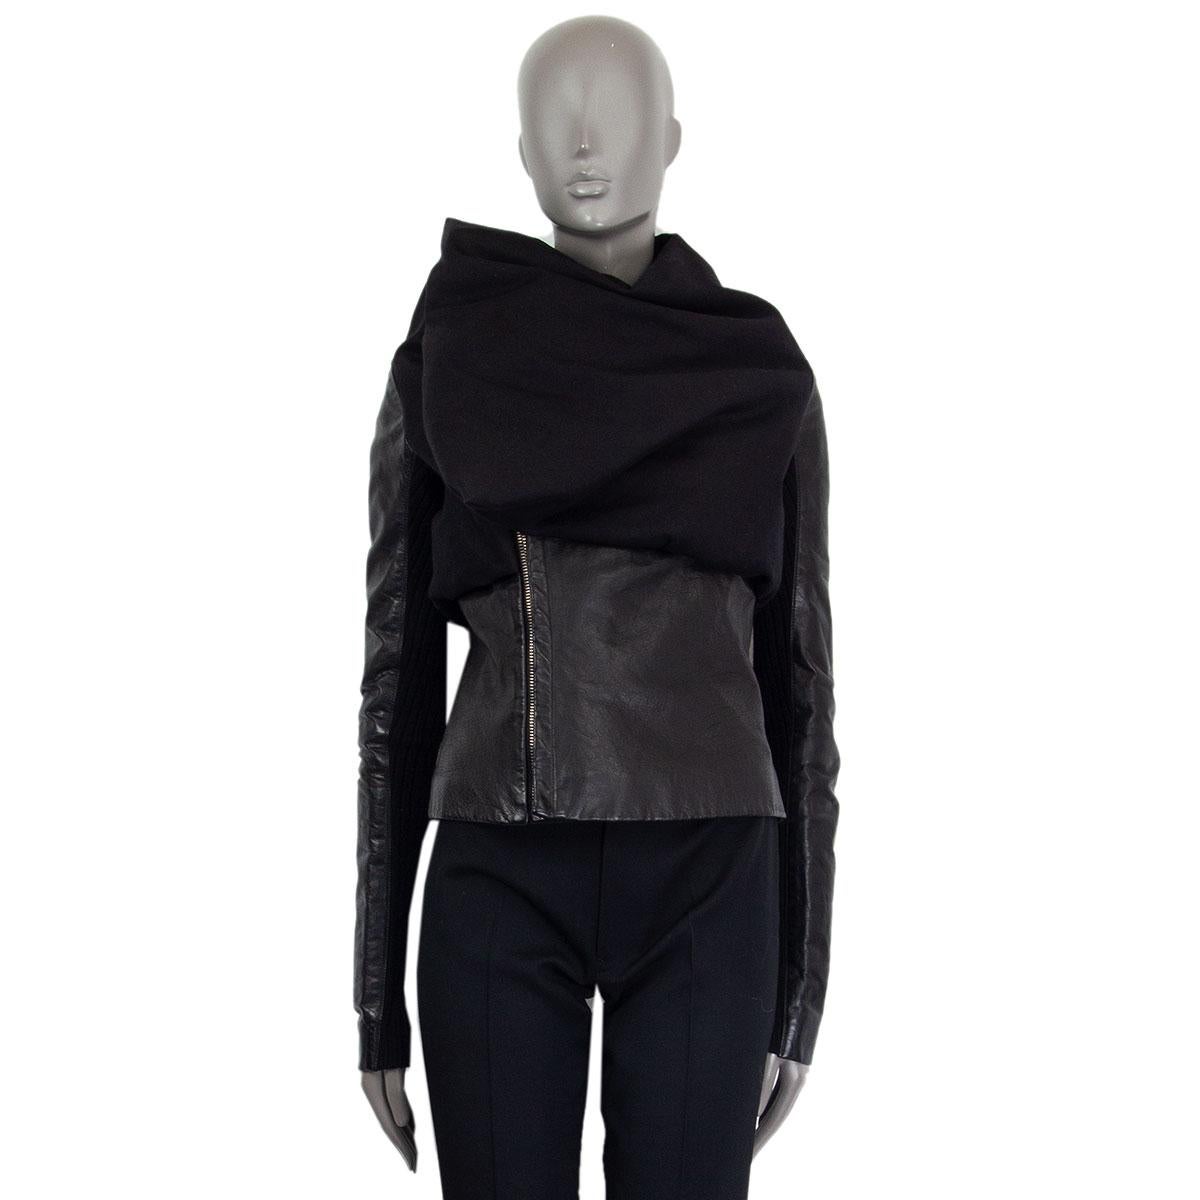 Rick Owens padded pouch front jacket in black calf leather (50%), cotton (40%), alpaca (5%) and nylon (5%). Has inner knit detailed sleeves. Closes on the front with a zipper. Lined in rayon (60%), cotton (35%) and silk (5%). Padding is polyester